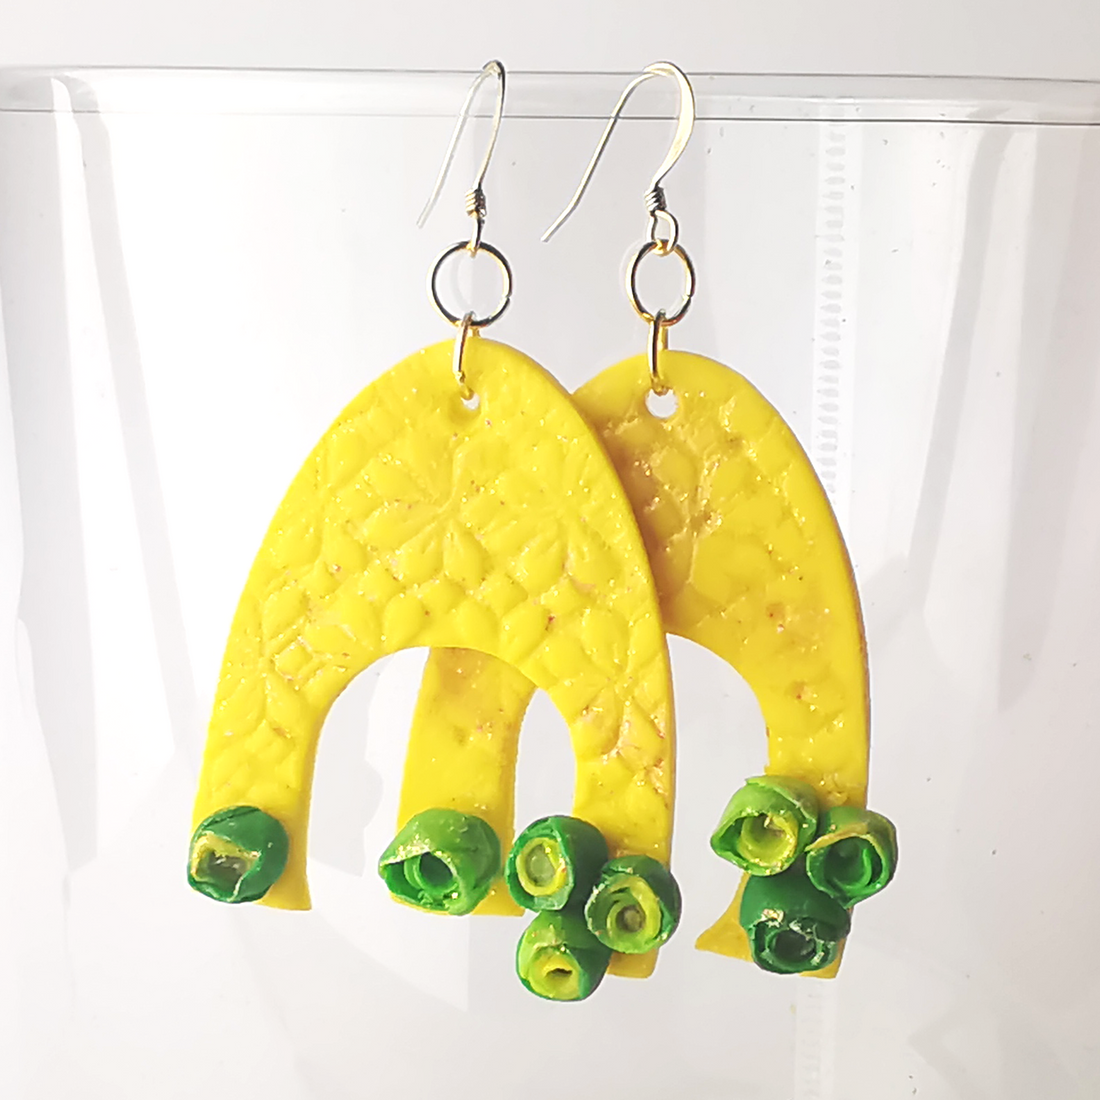 Make these Sunny Yellow Modern Polymer Clay Earrings with a Twist